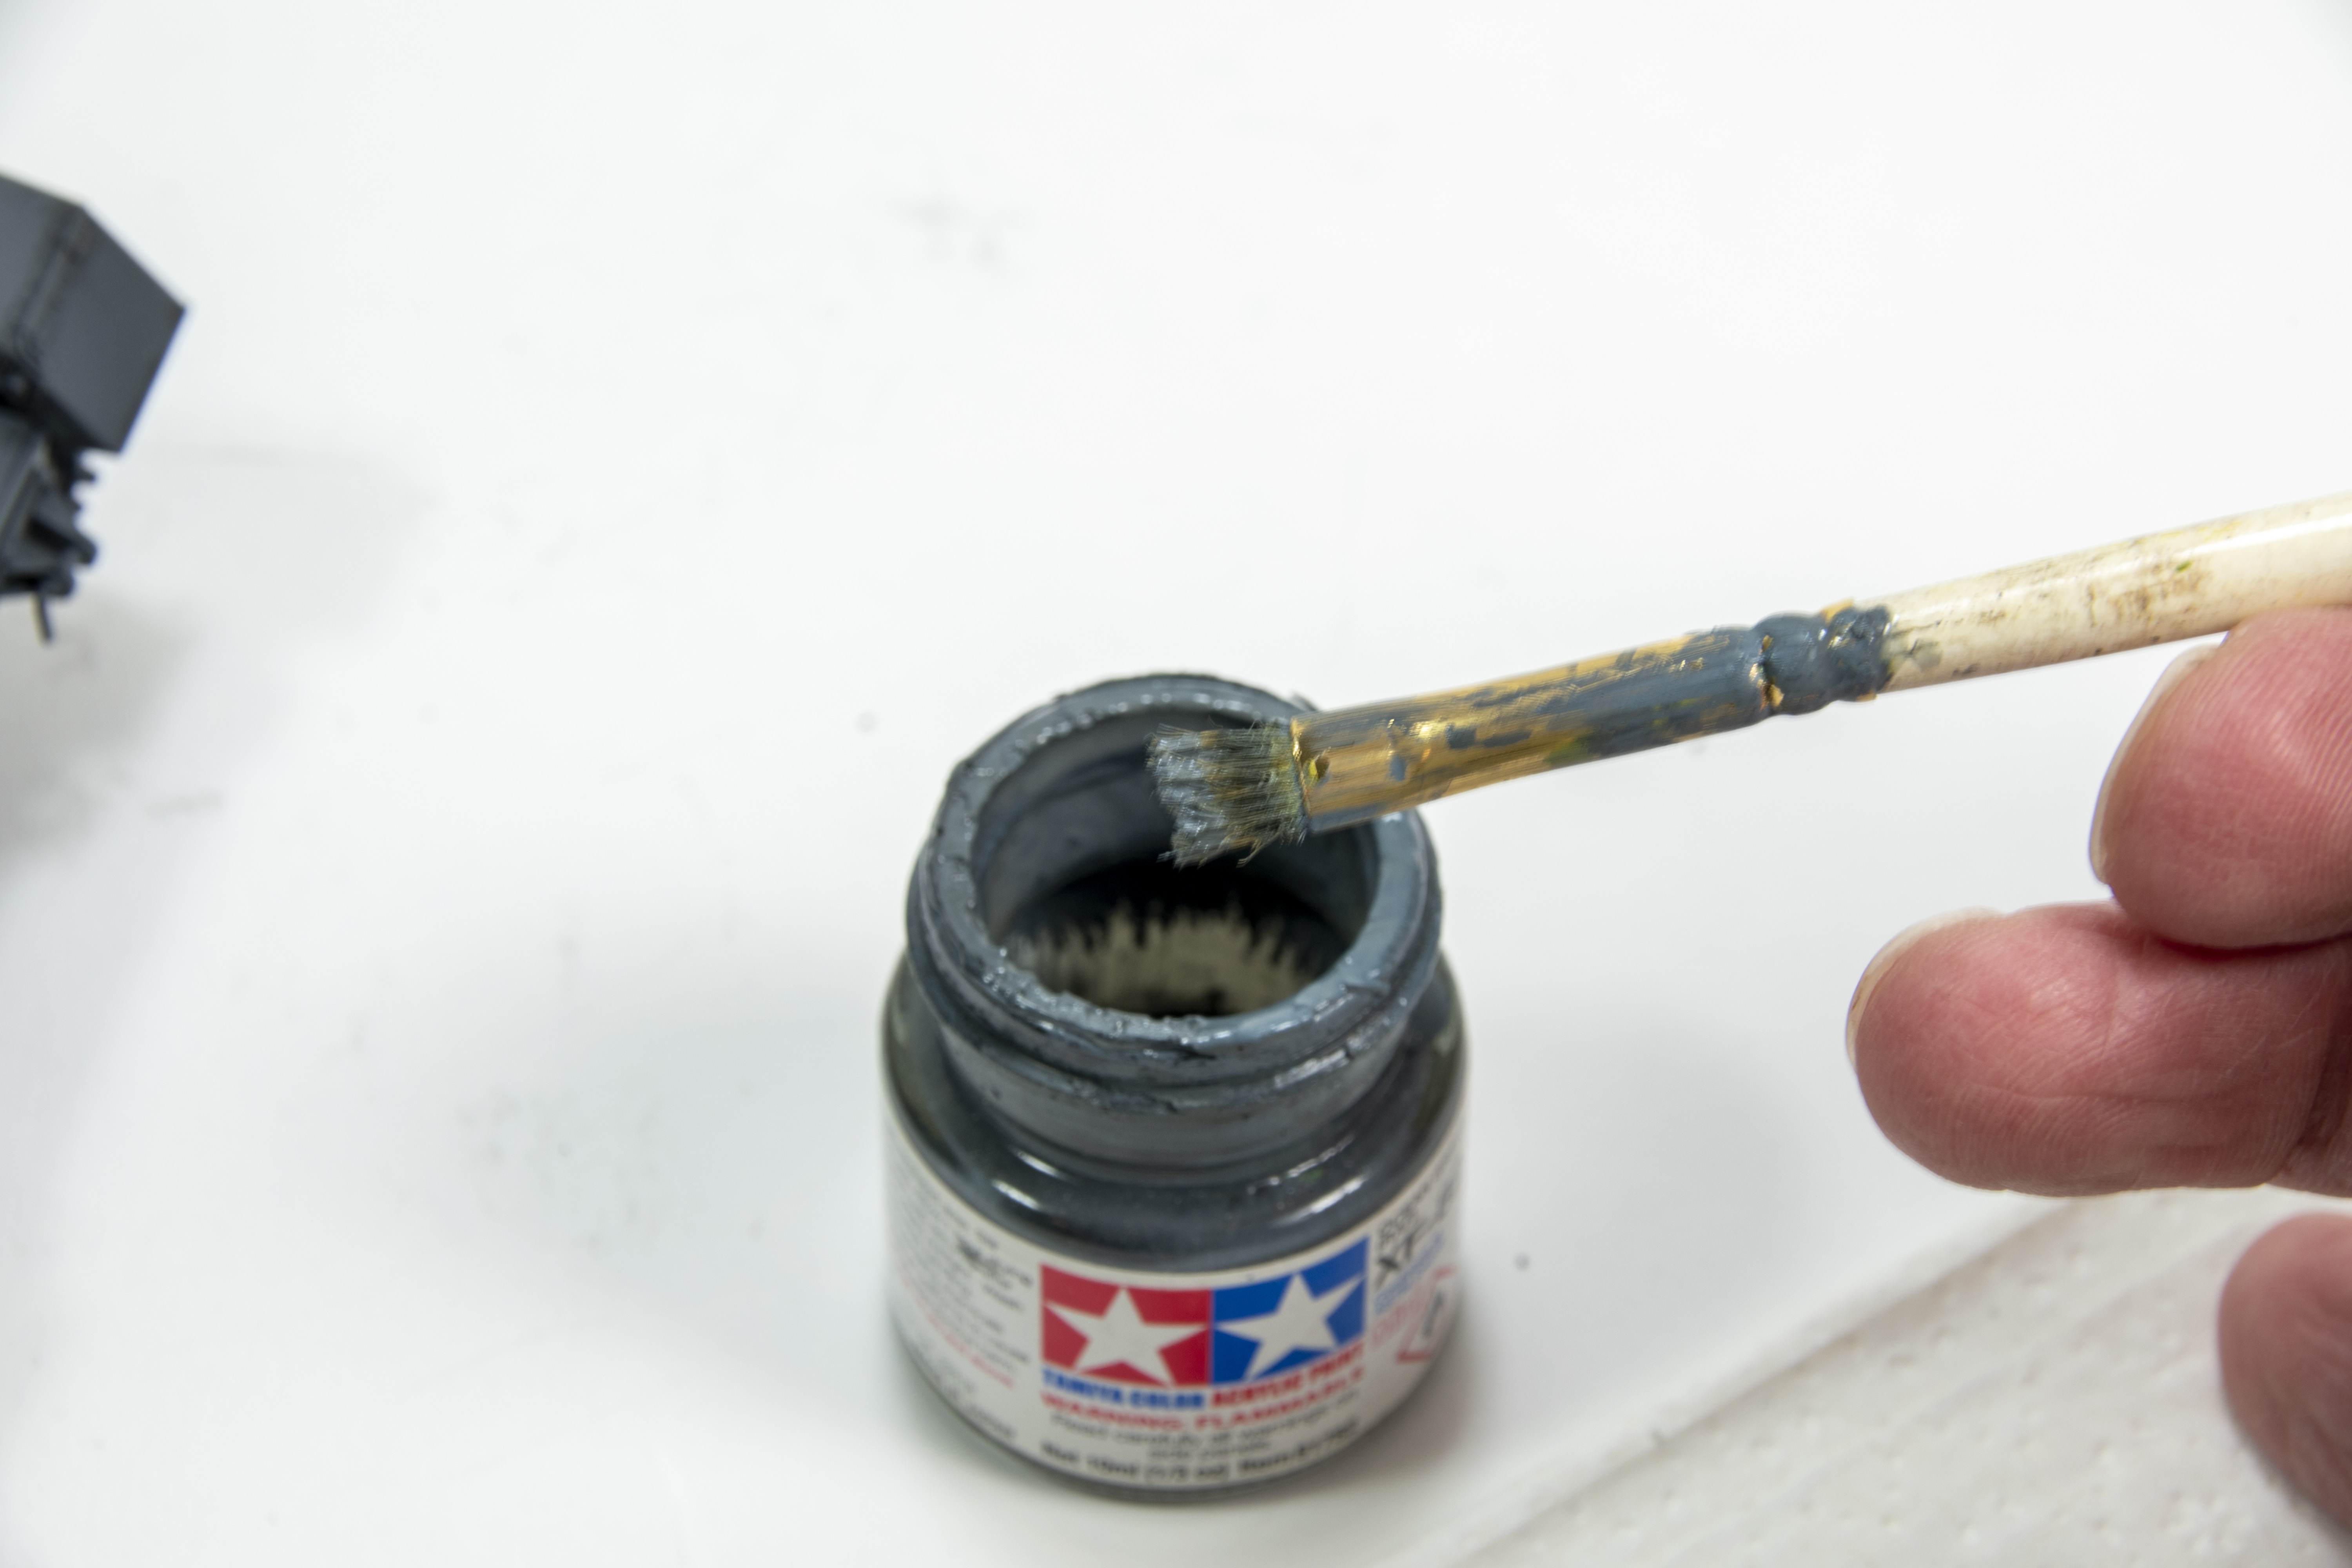 How to dry-brush paint on a scale model